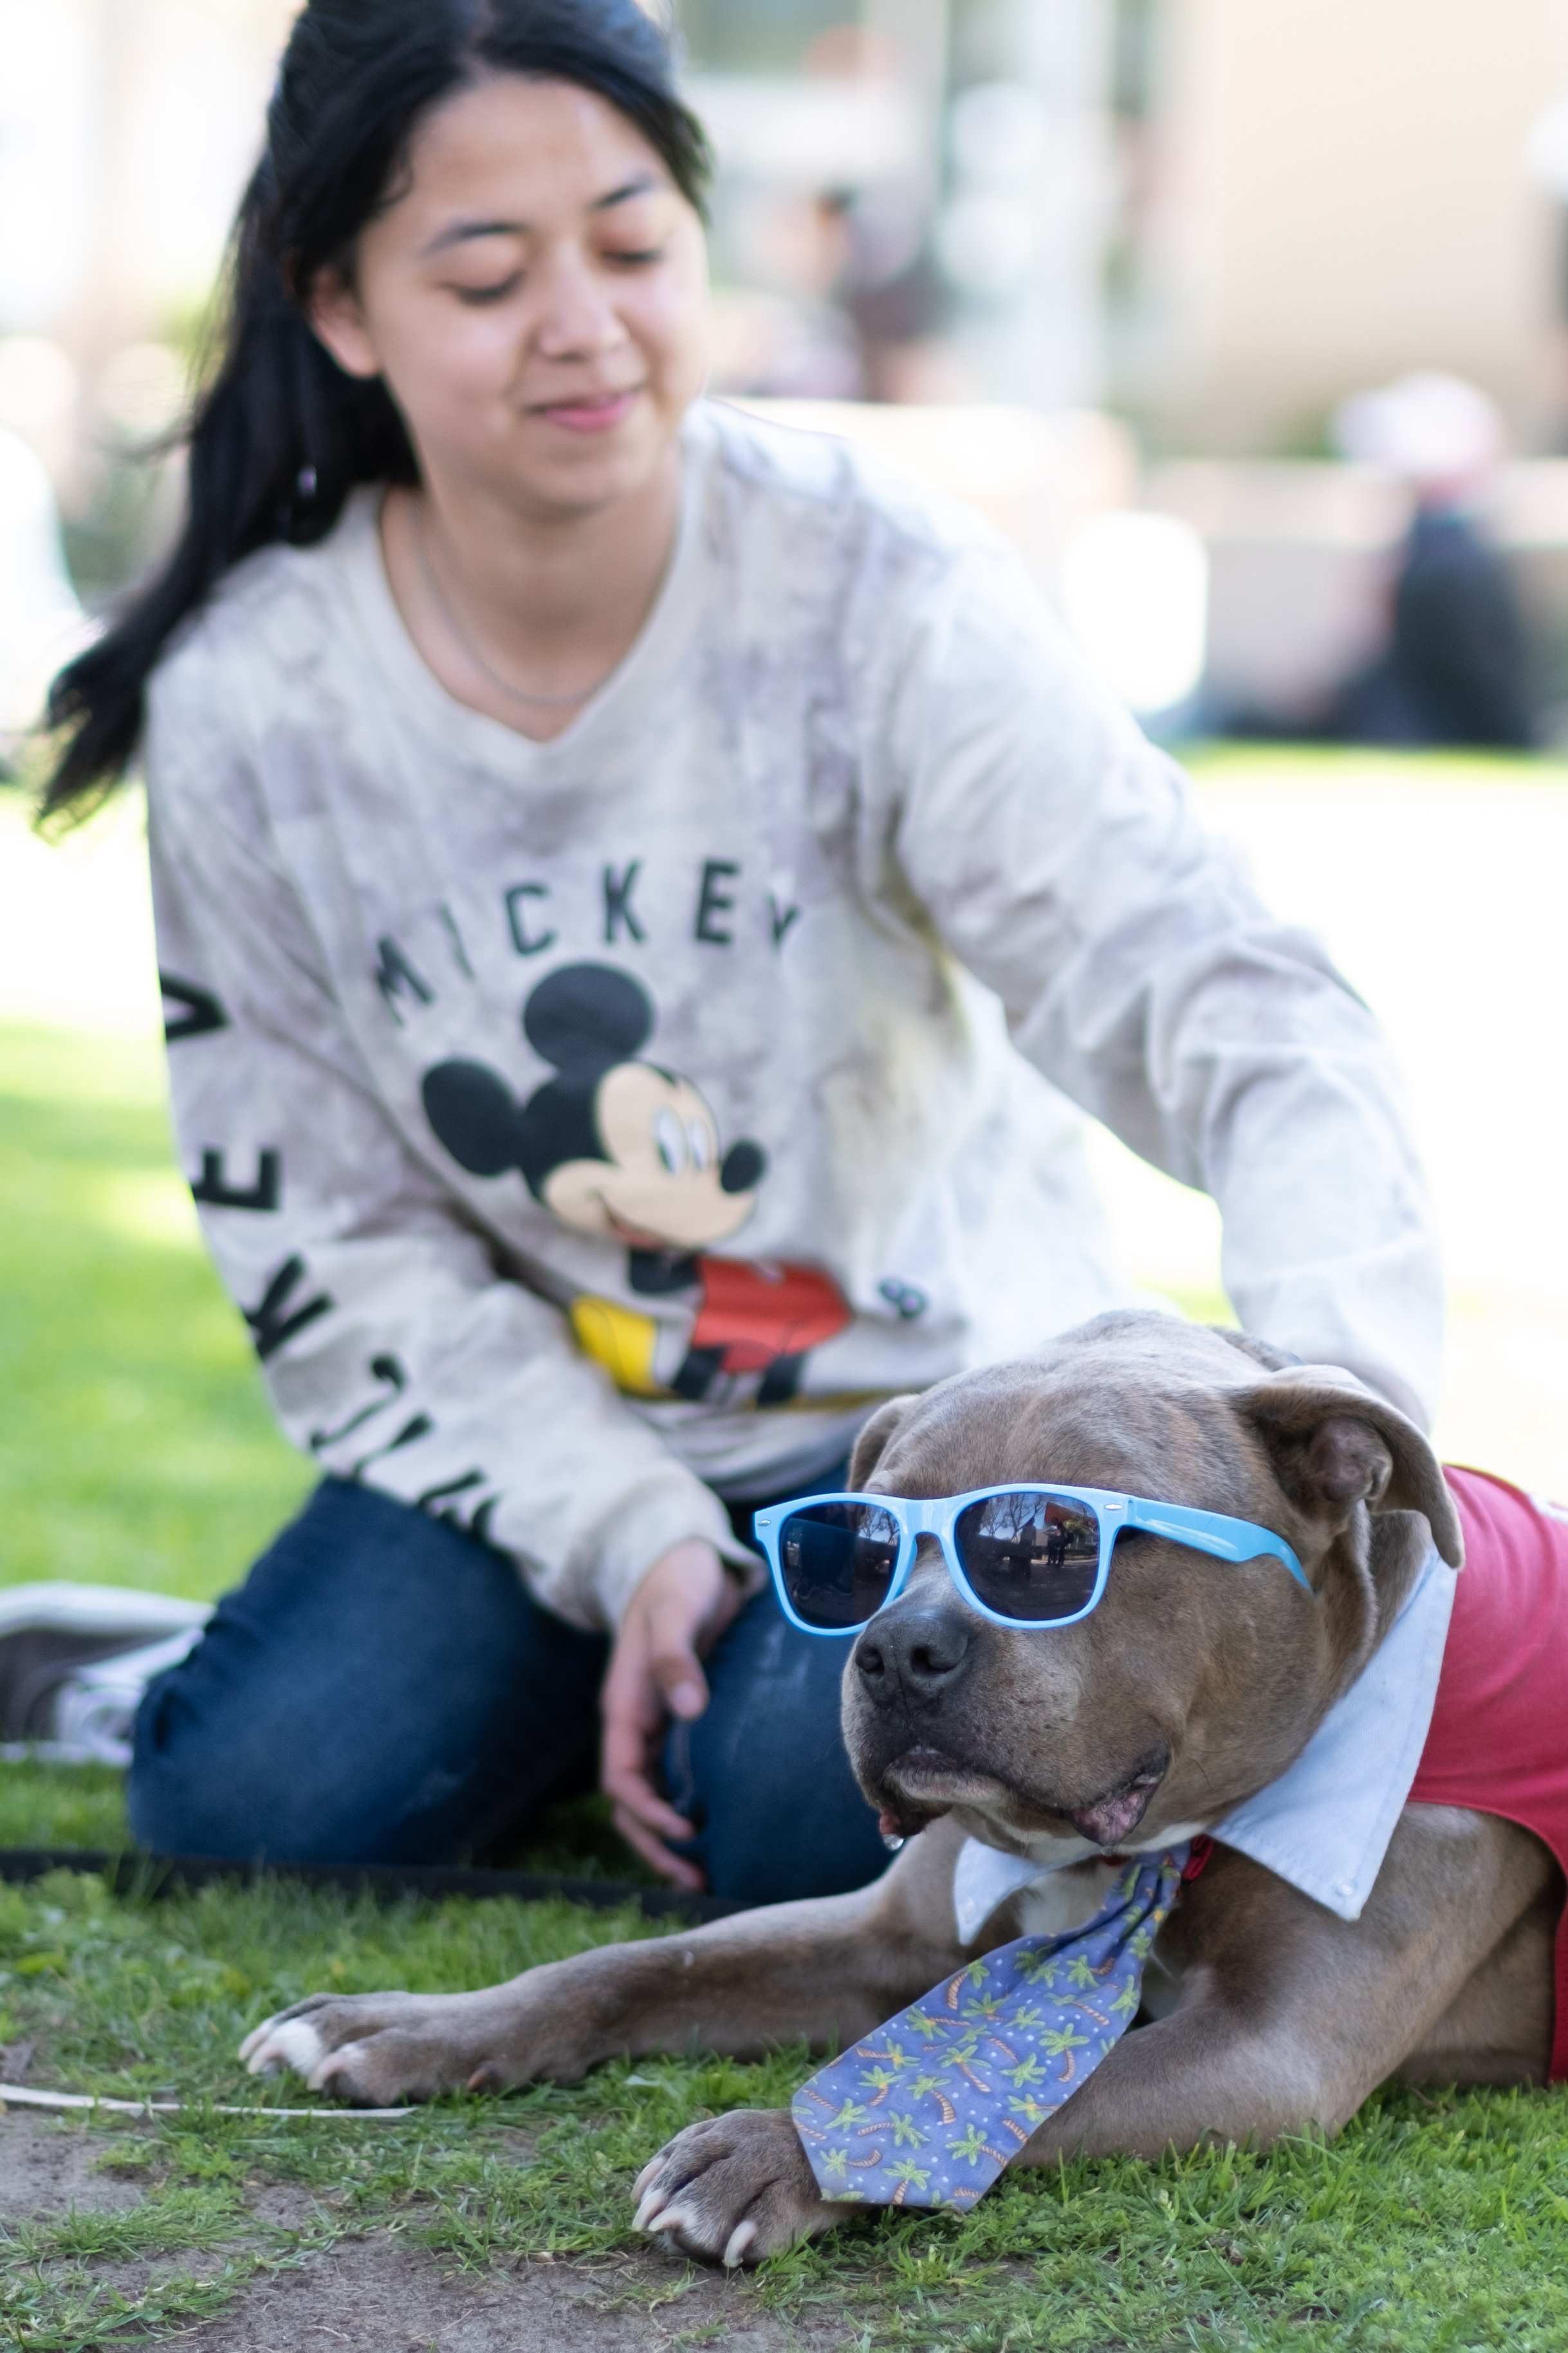  Emily Benavides, Law major, pets Rusty, an American Staffordshire Terrier therapy dog, on the Quad during midterm week at Motivational Madness, an event for students to relax and take a break from studying on Tuesday, March 4th, 2023 at Santa Monica